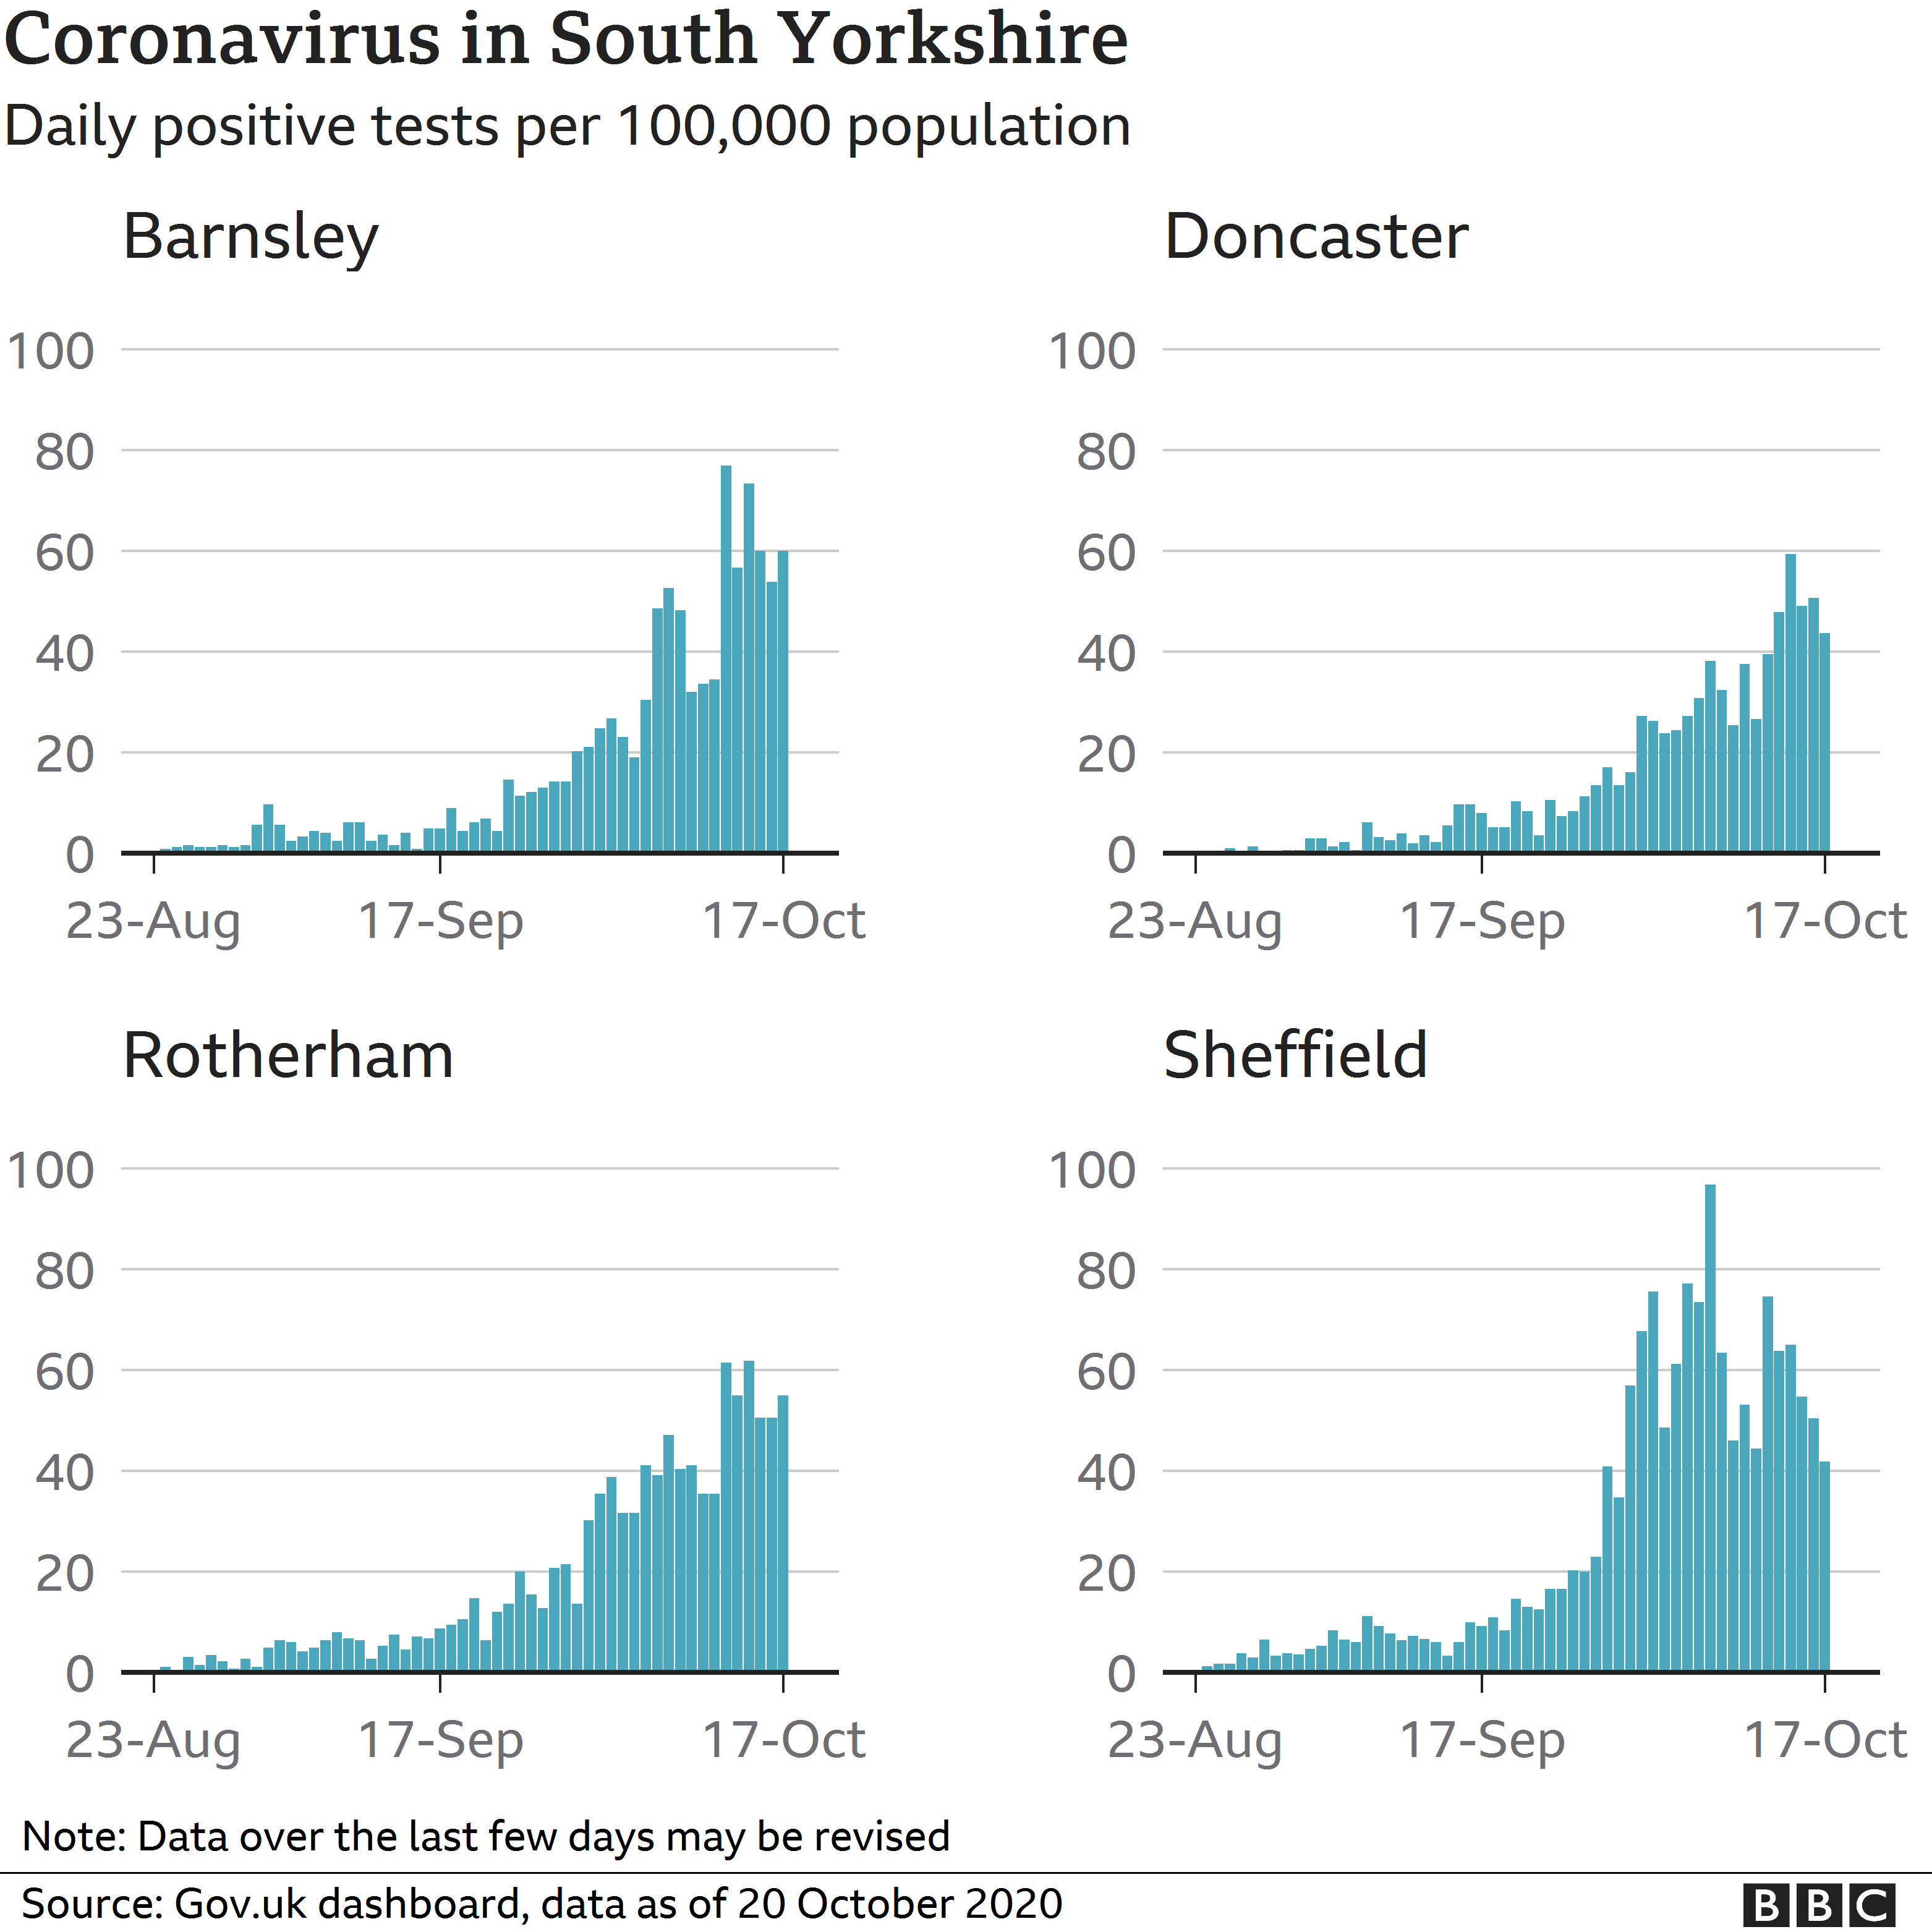 Infection rates in South Yorkshire